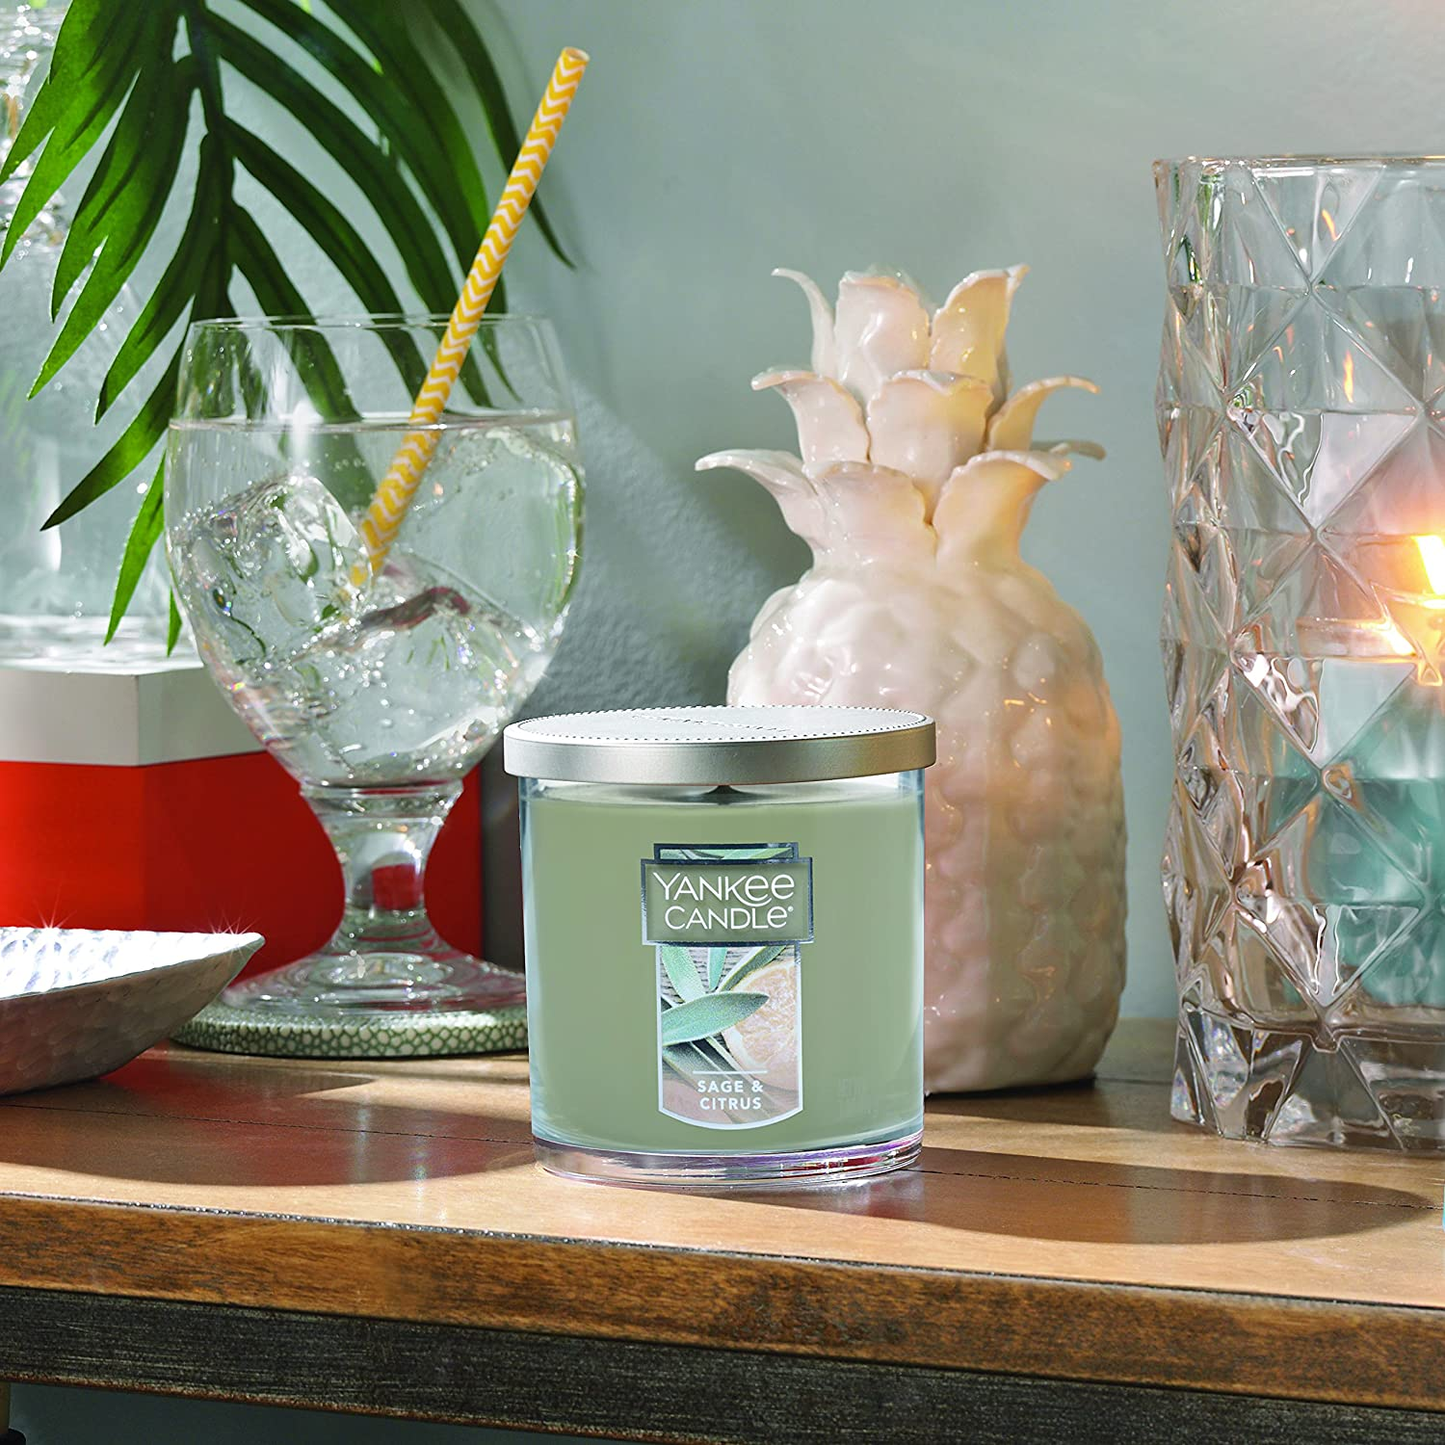 Sage & Citrus Scented, Classic 7Oz Small Tumbler Single Wick Candle, over 35 Hours of Burn Time